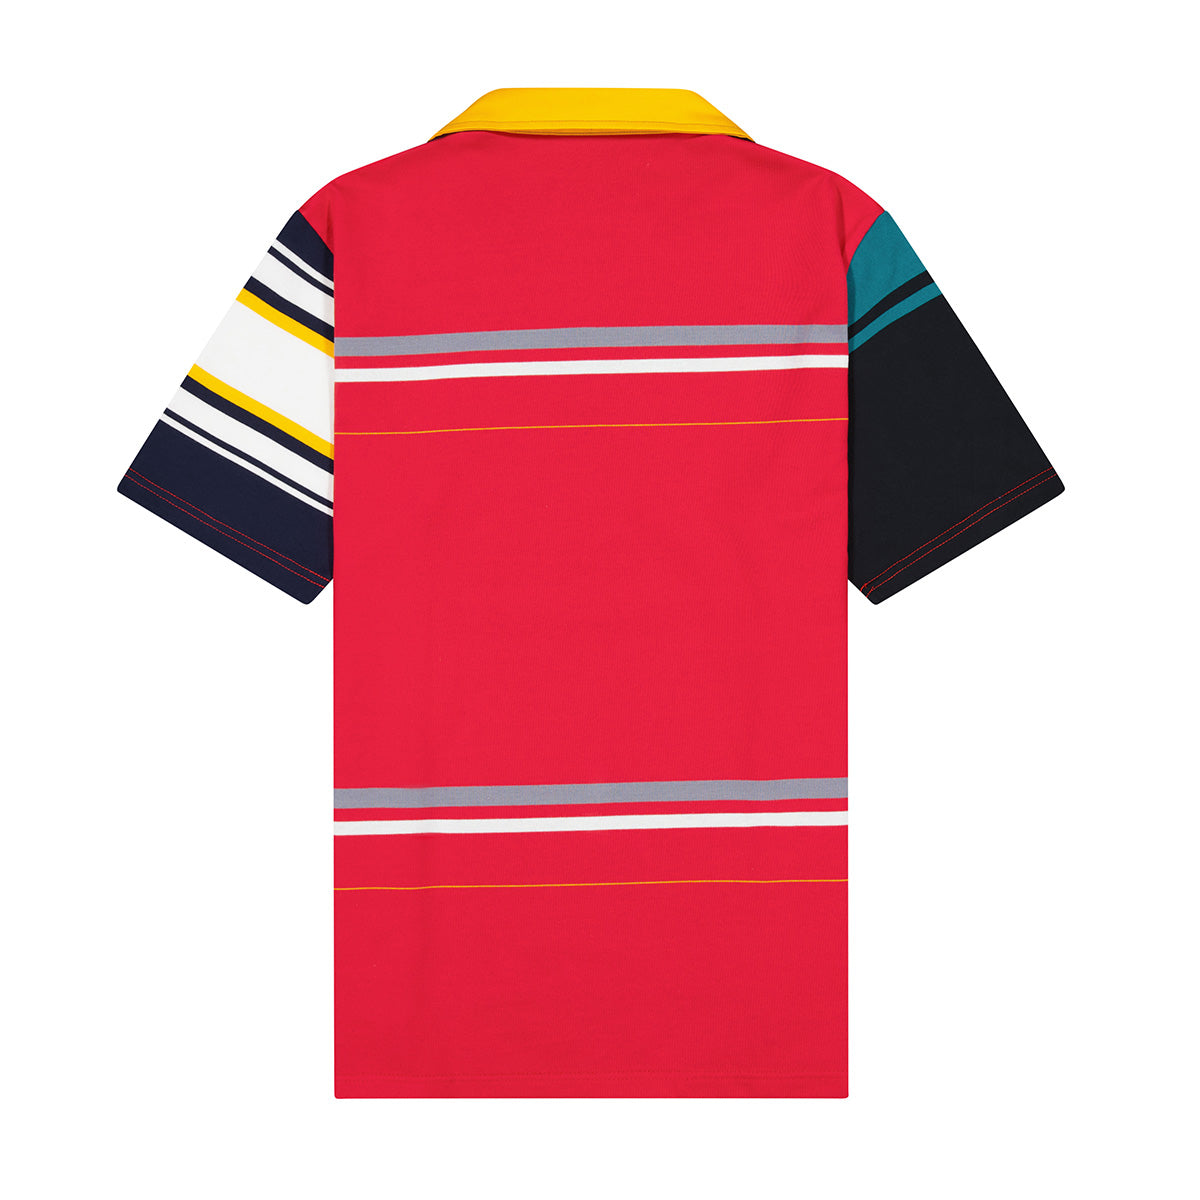 All Sorts Polycotton Jersey - Short Sleeve + Free Rugby Shorts & Socks